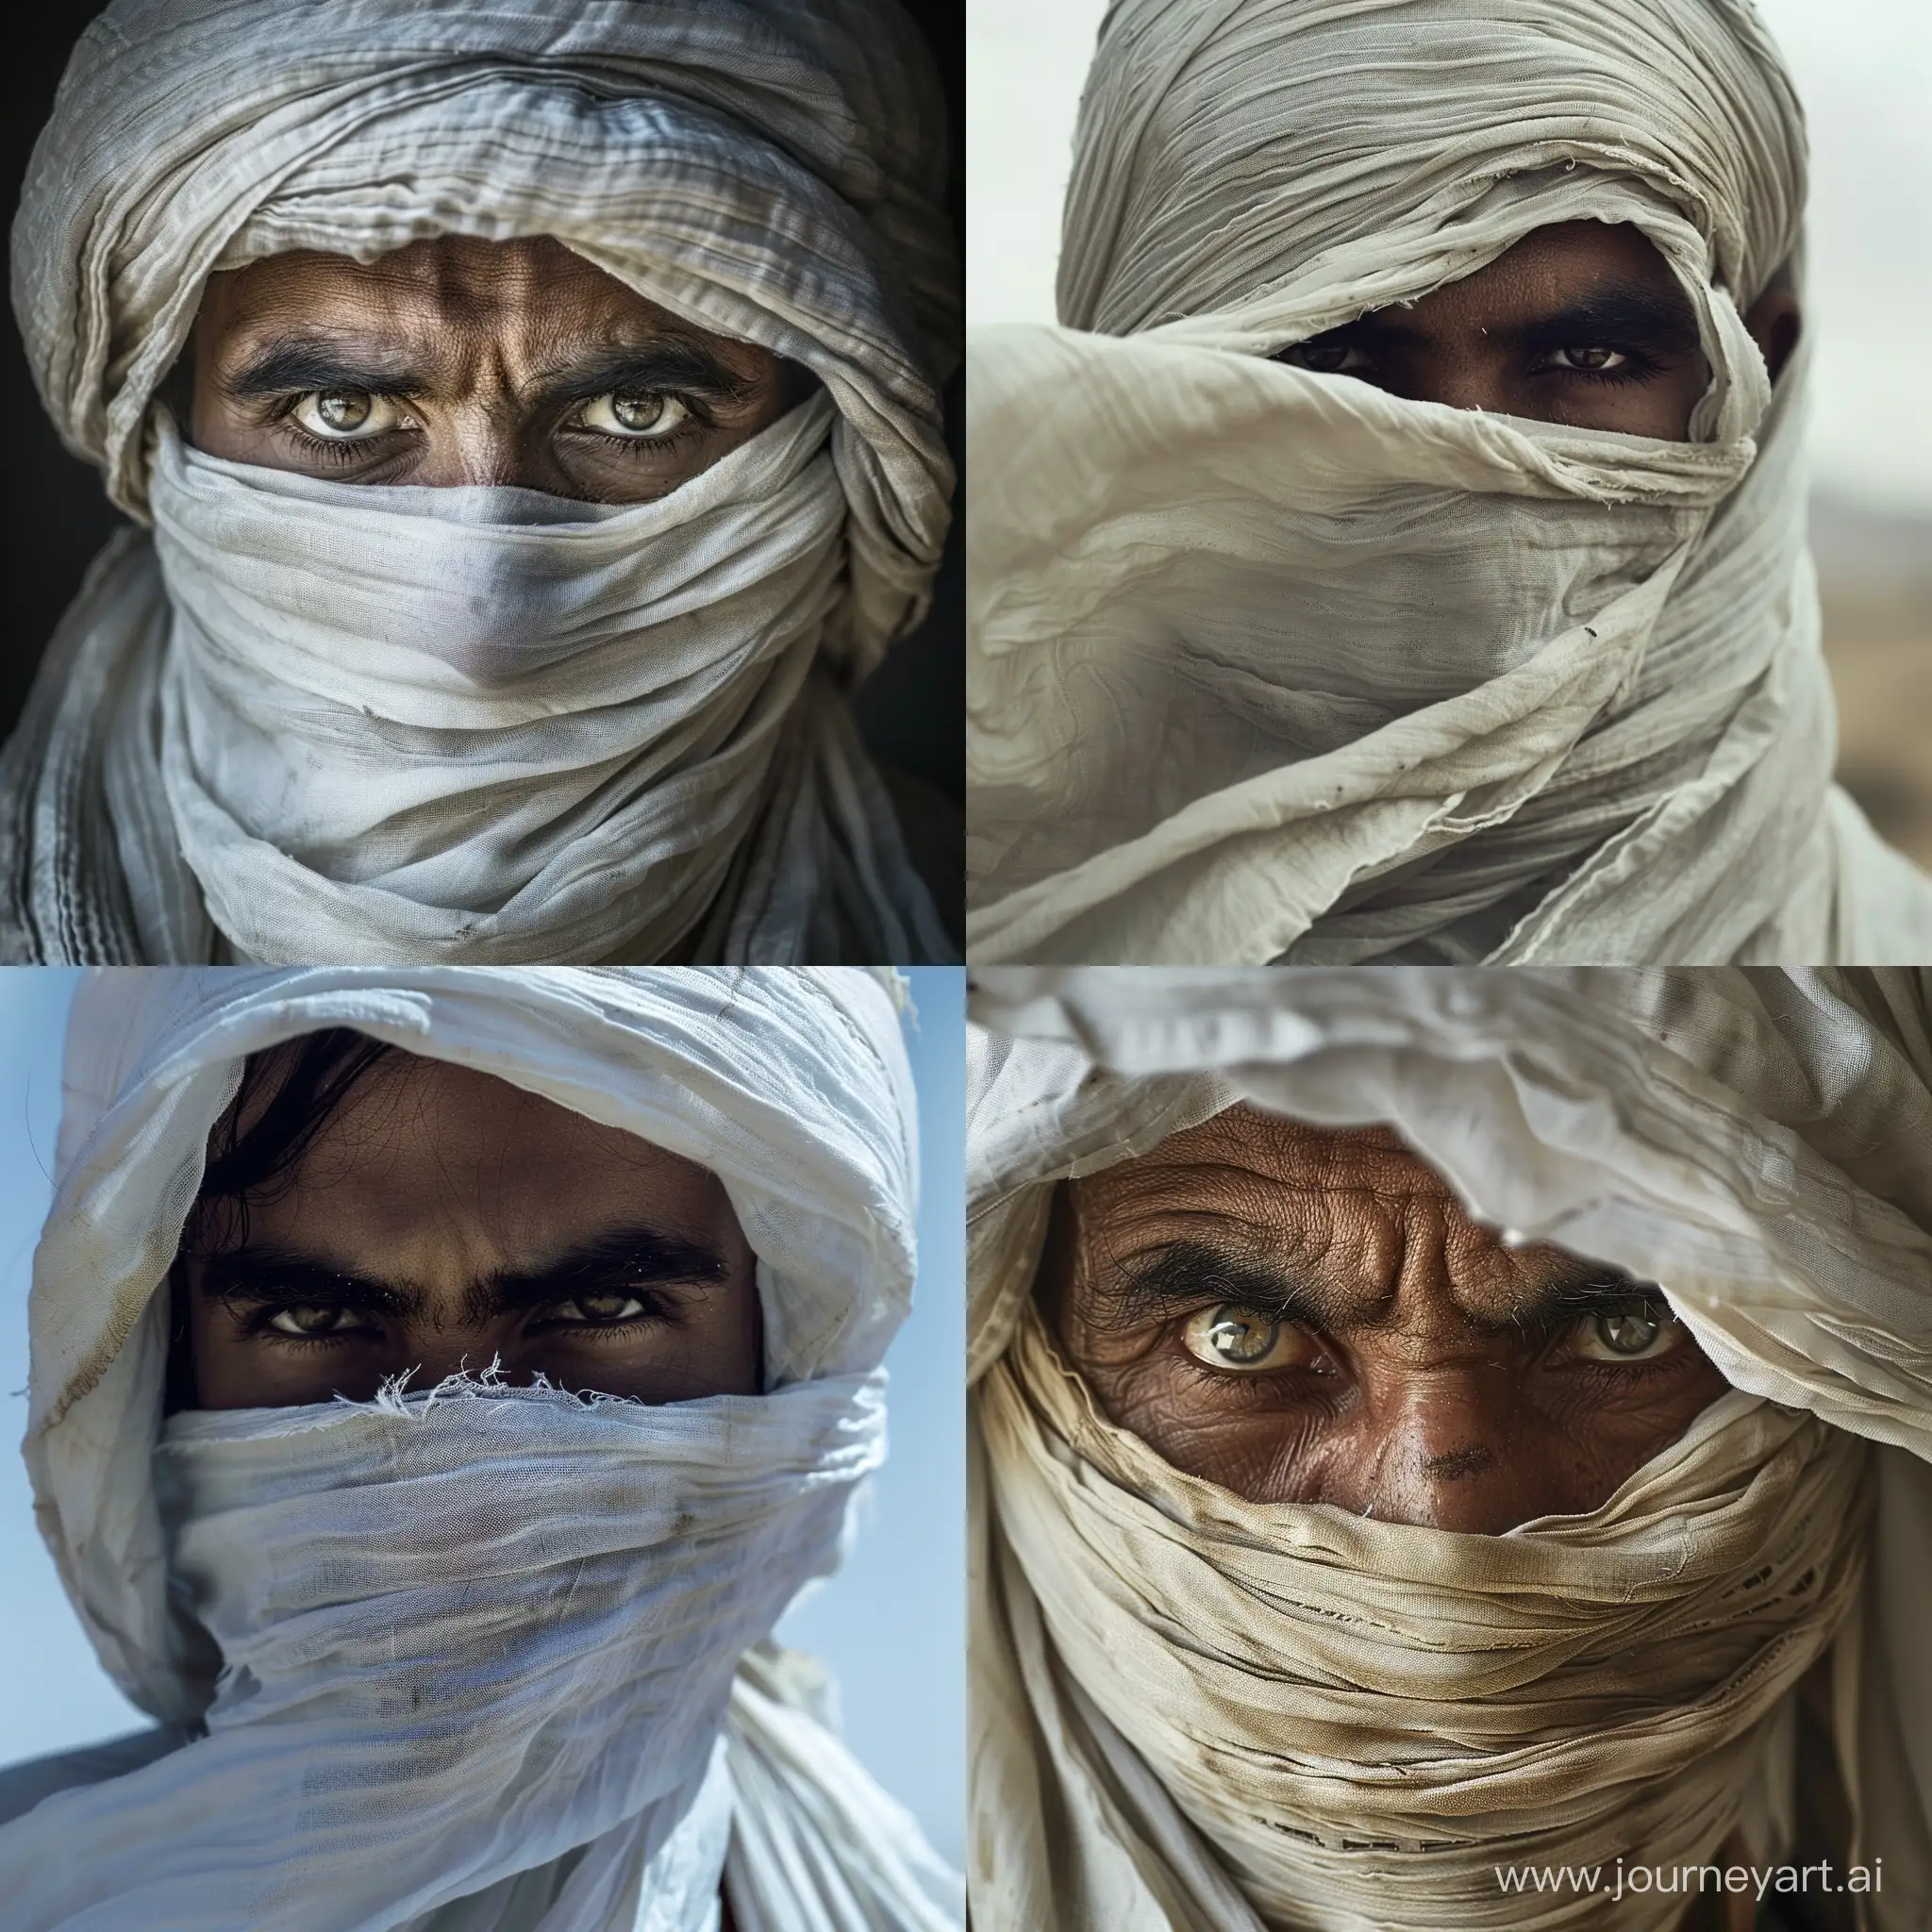 Tenth century arabian man tight face covered by a white cloth in windy effect, sharp eyes